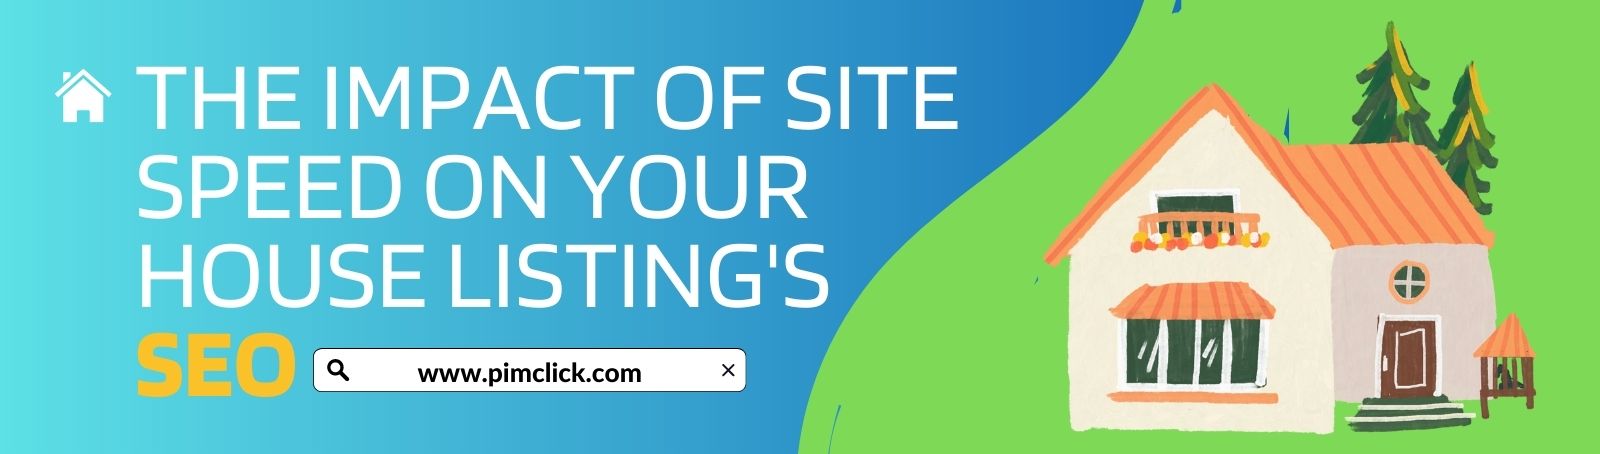 the-impact-of-site-speed-on-your-house-listings-seo